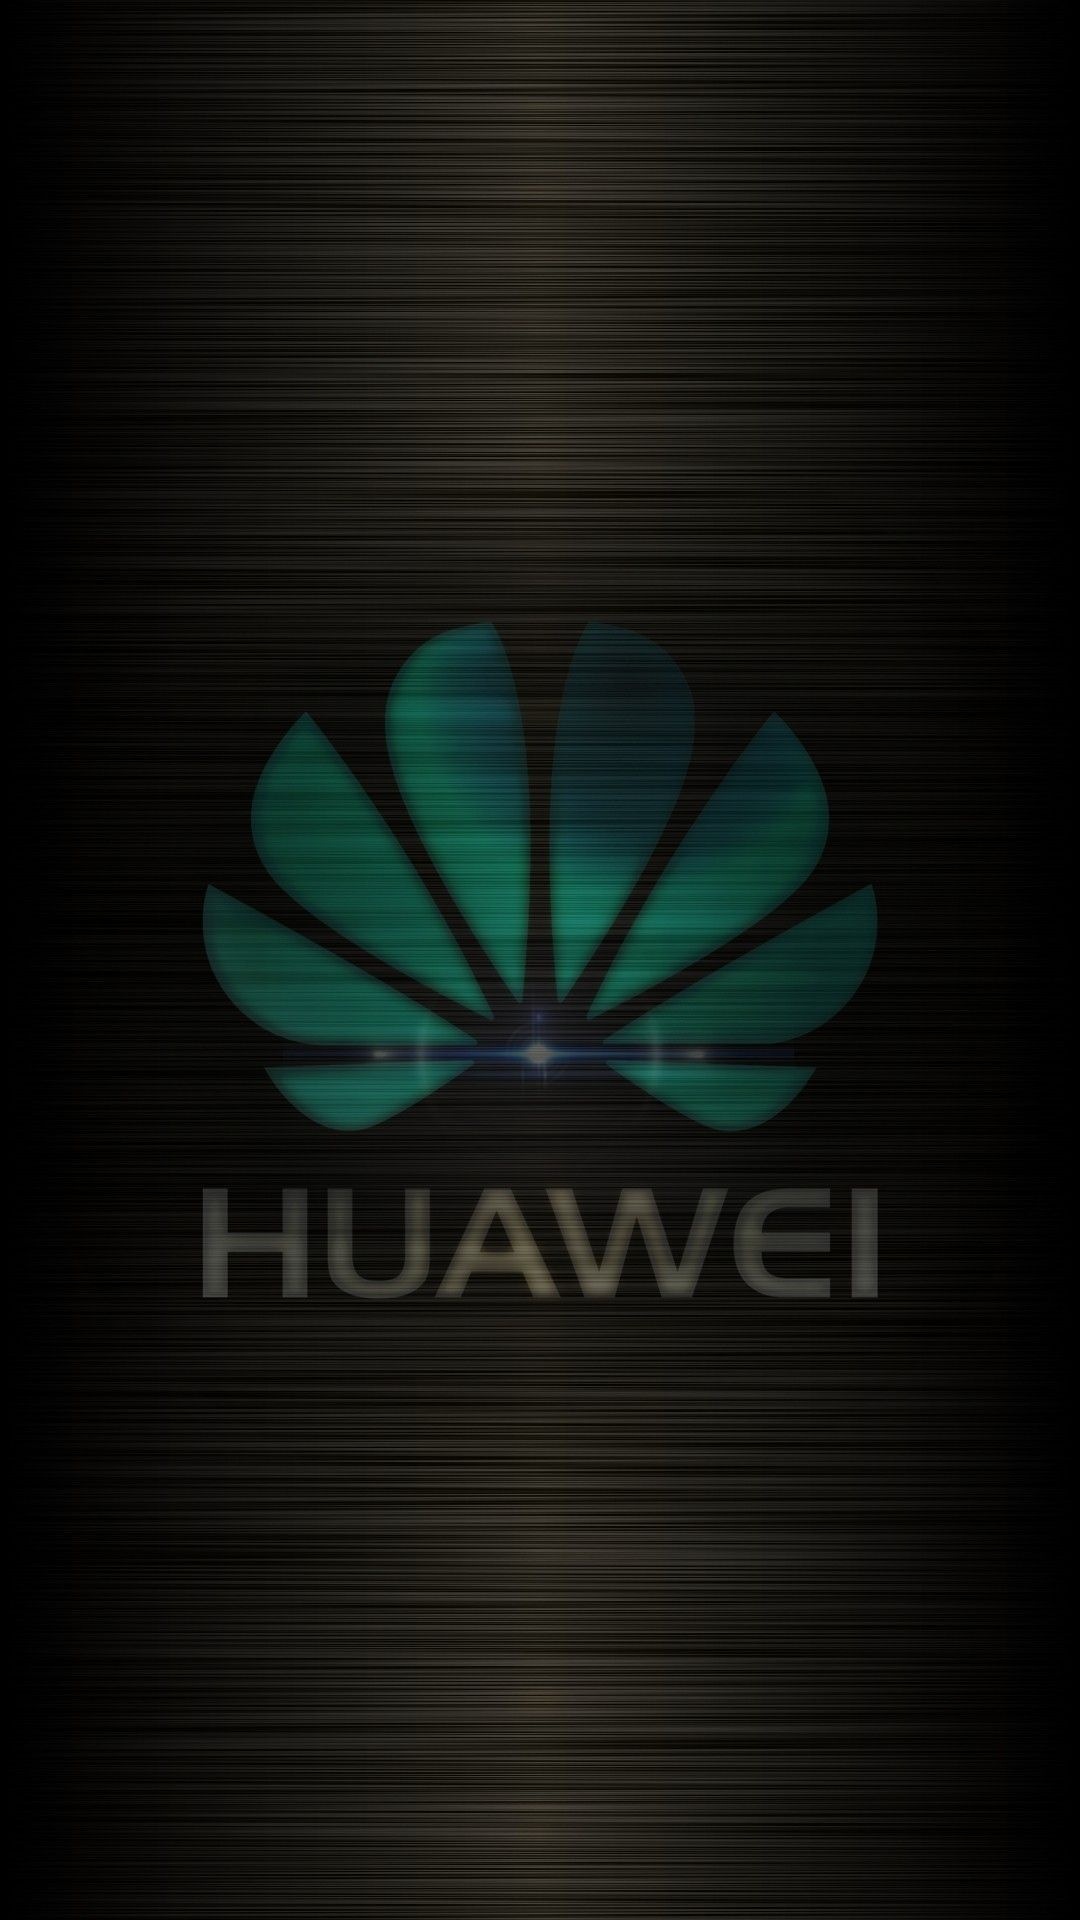 Huawei: The corporation was founded in 1987 by Ren Zhengfei, The largest telecommunications equipment manufacturer. 1080x1920 Full HD Wallpaper.